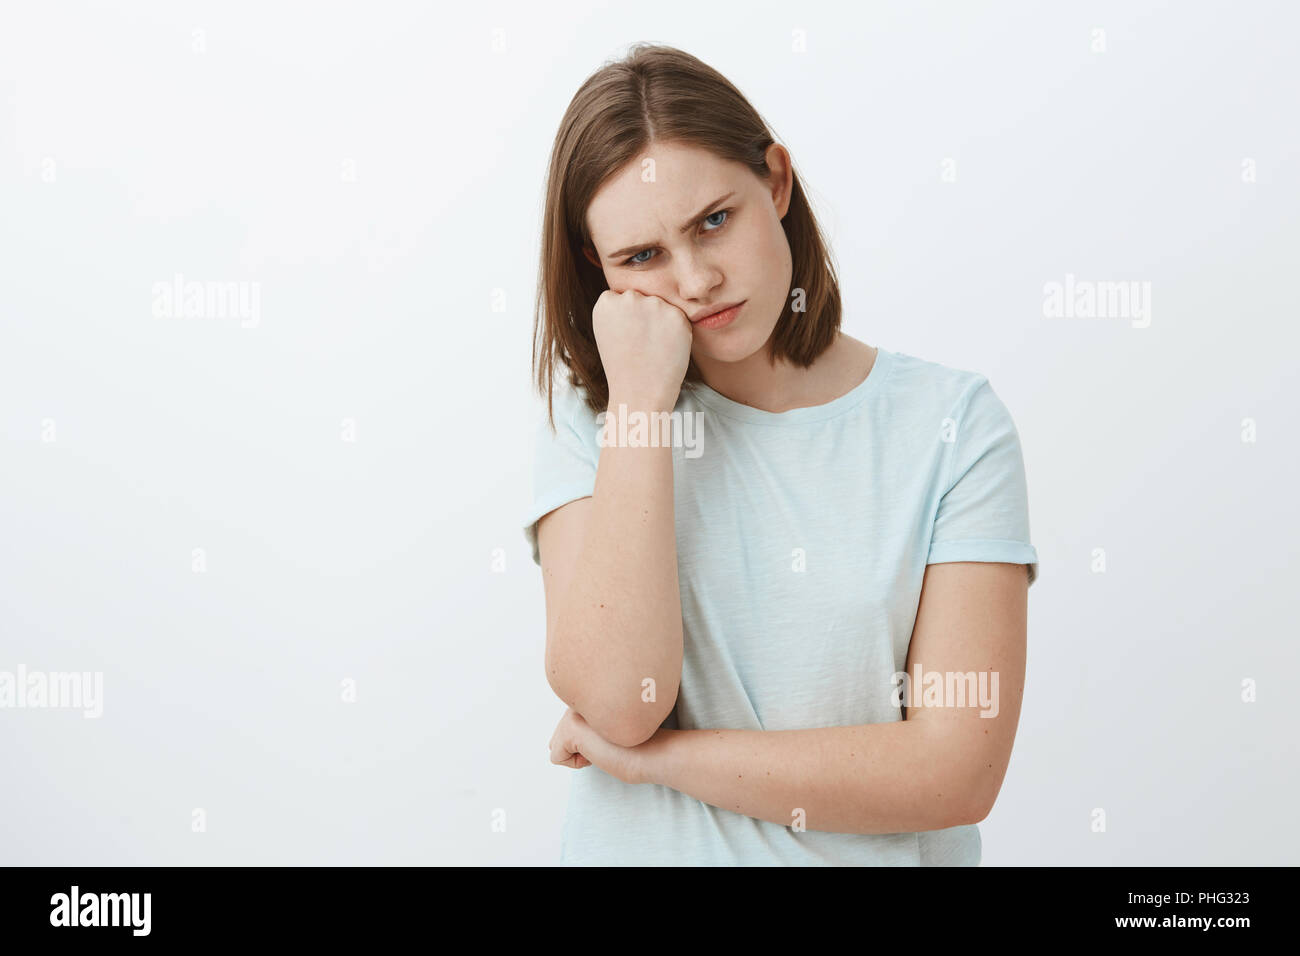 Studio shot of displeased offended and gloomy cute female brunette in t-shirt leaning face on fist frowning and pursing lips feeling envy or jealous seing sibling received awesome gift from parents Stock Photo